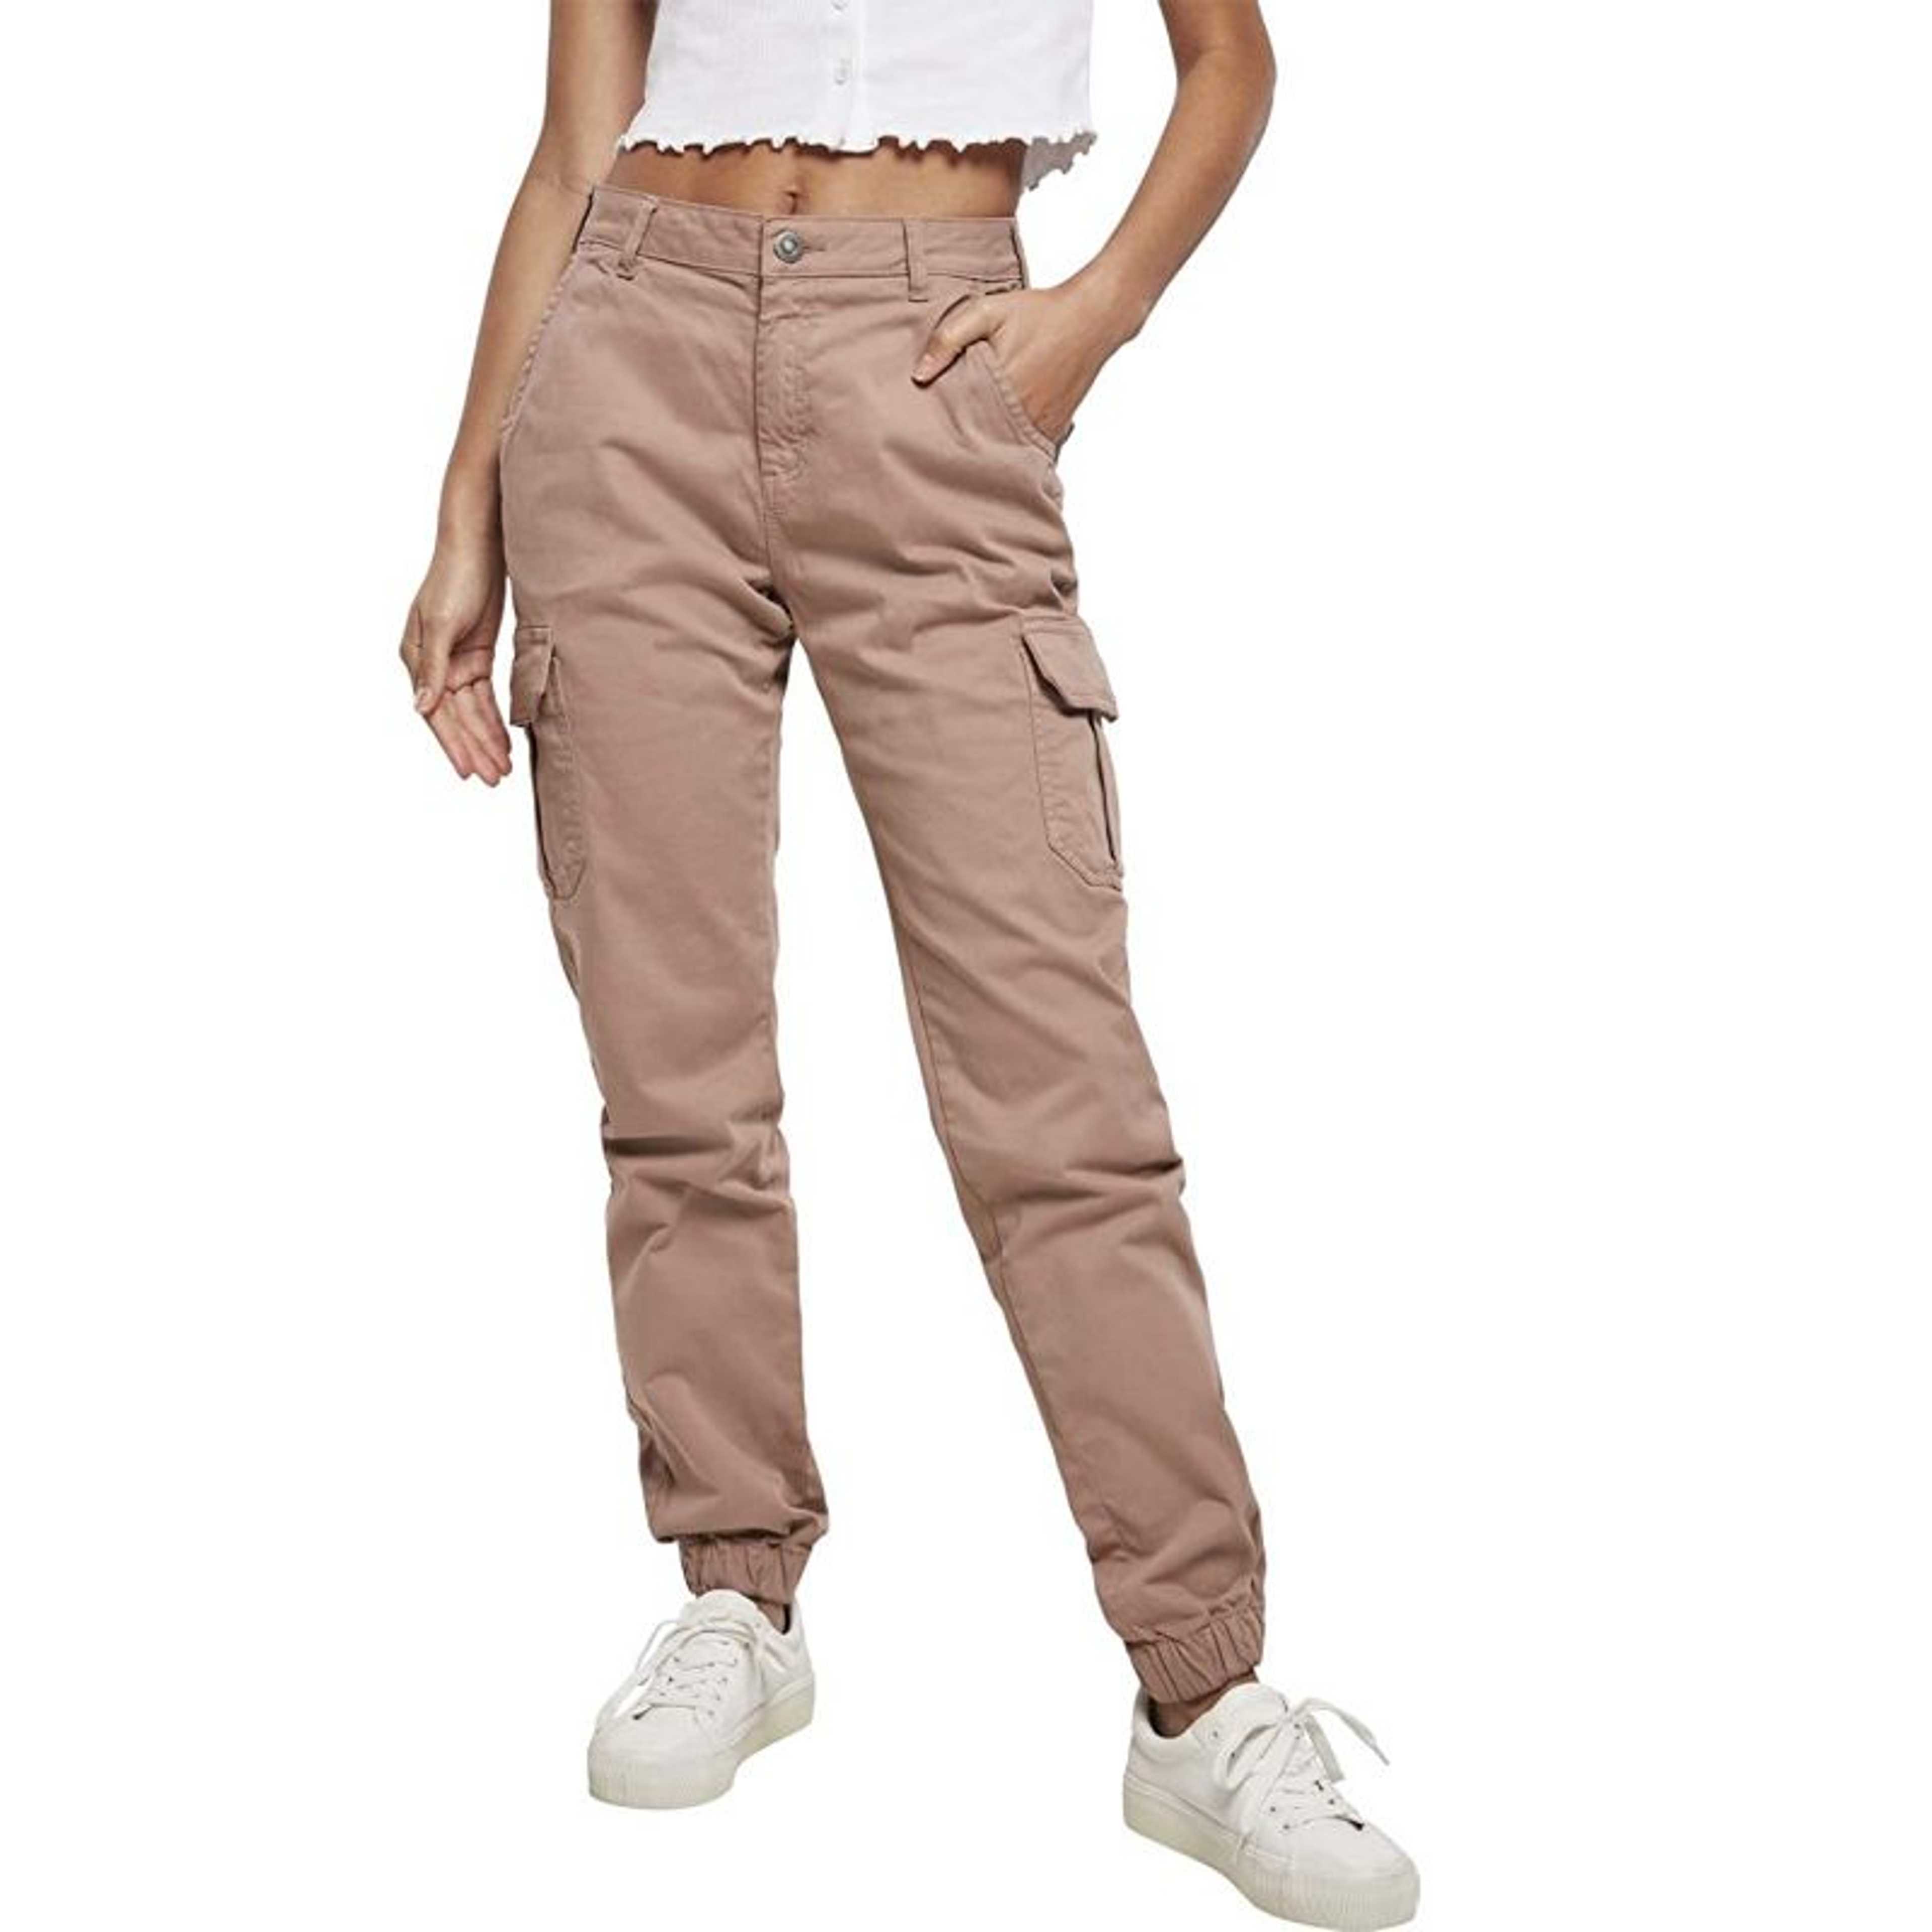 Tea Pink Rubahas Womens Cargo Trousers Ladies Trousers Jeans Pants